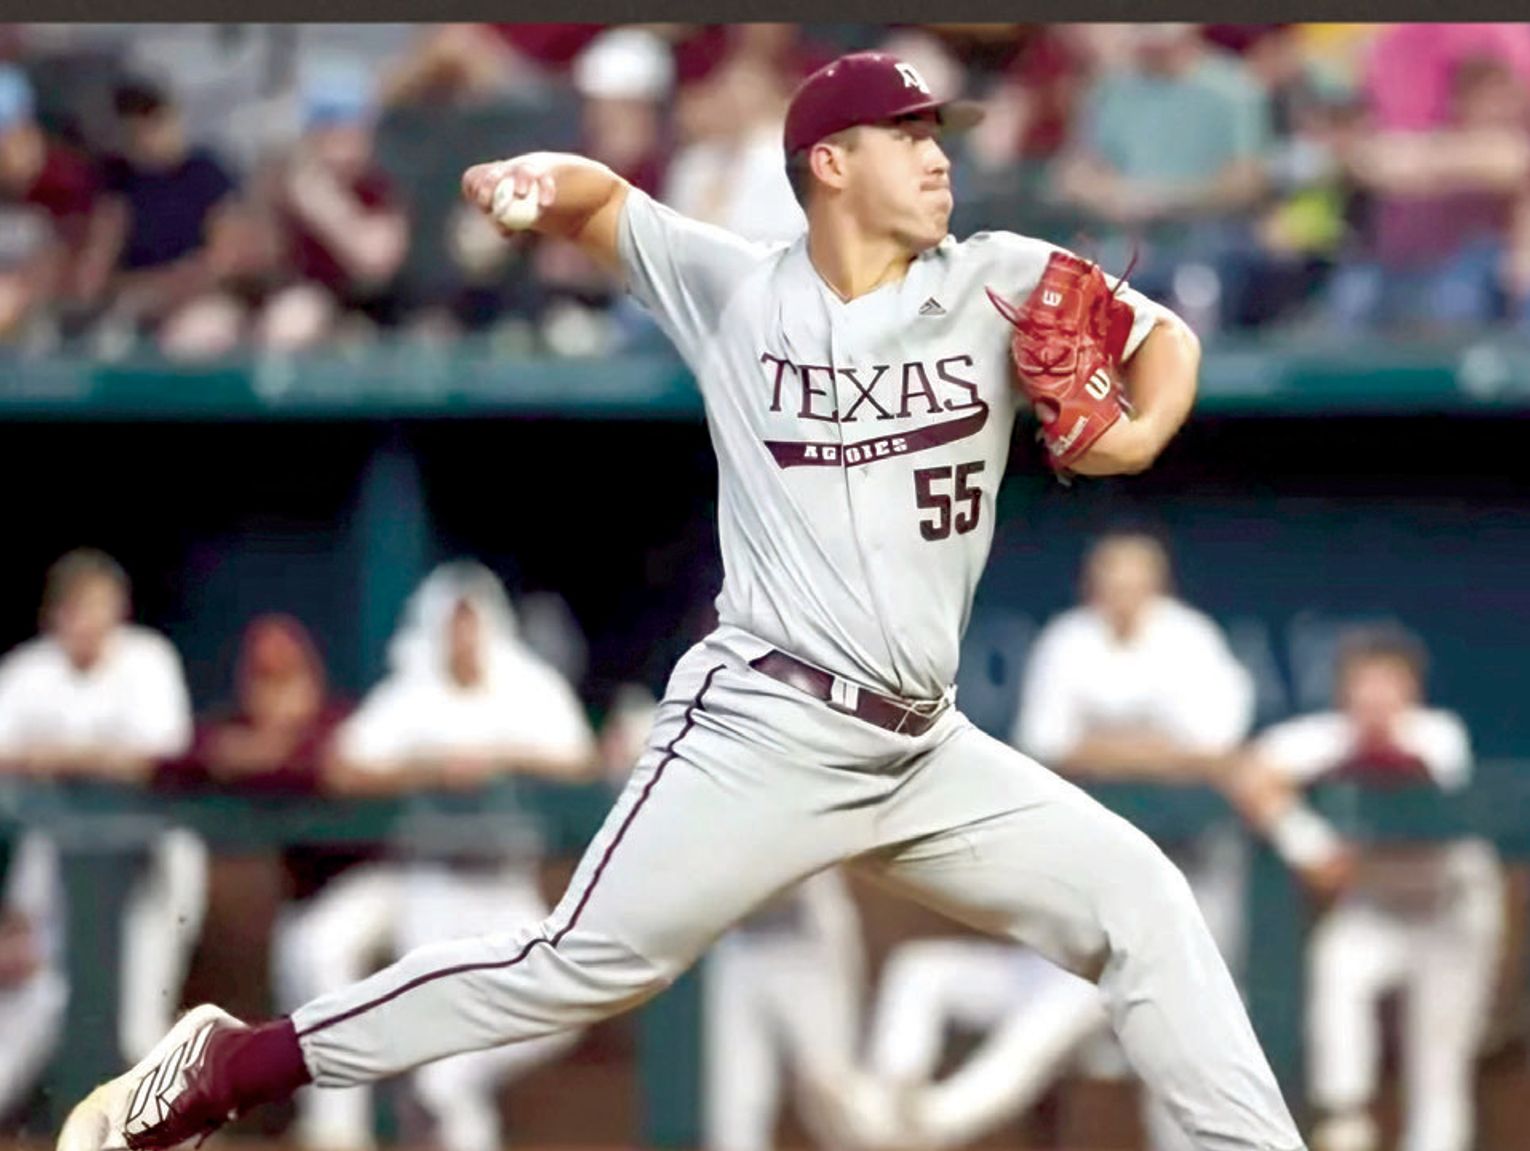 Boerne High grad to play in College World Series